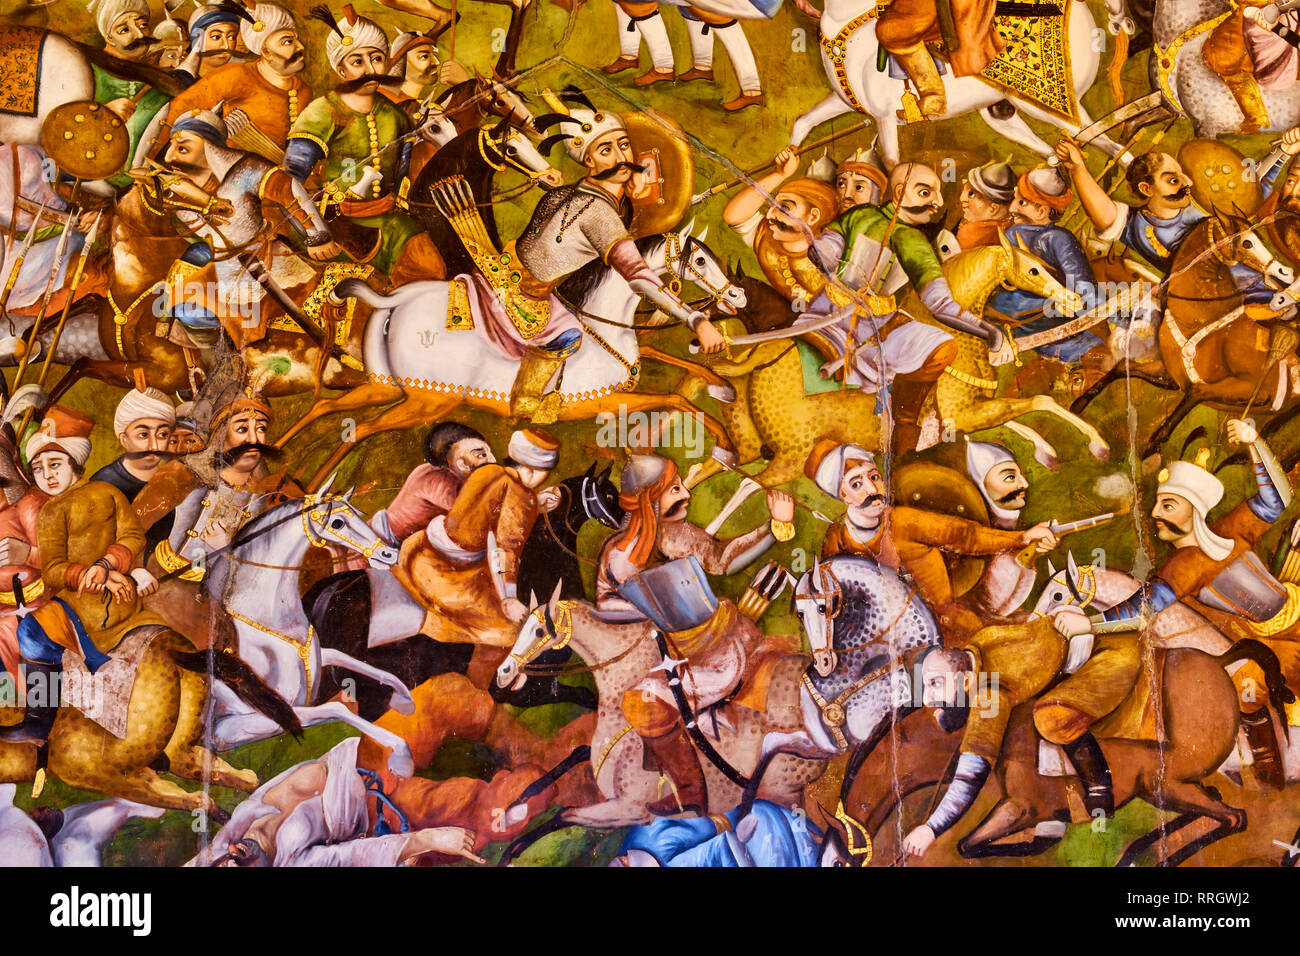 The Great Hall (Throne Hall) painting, Chehel Sotun Palace, Isfahan, Iran, Middle East Stock Photo